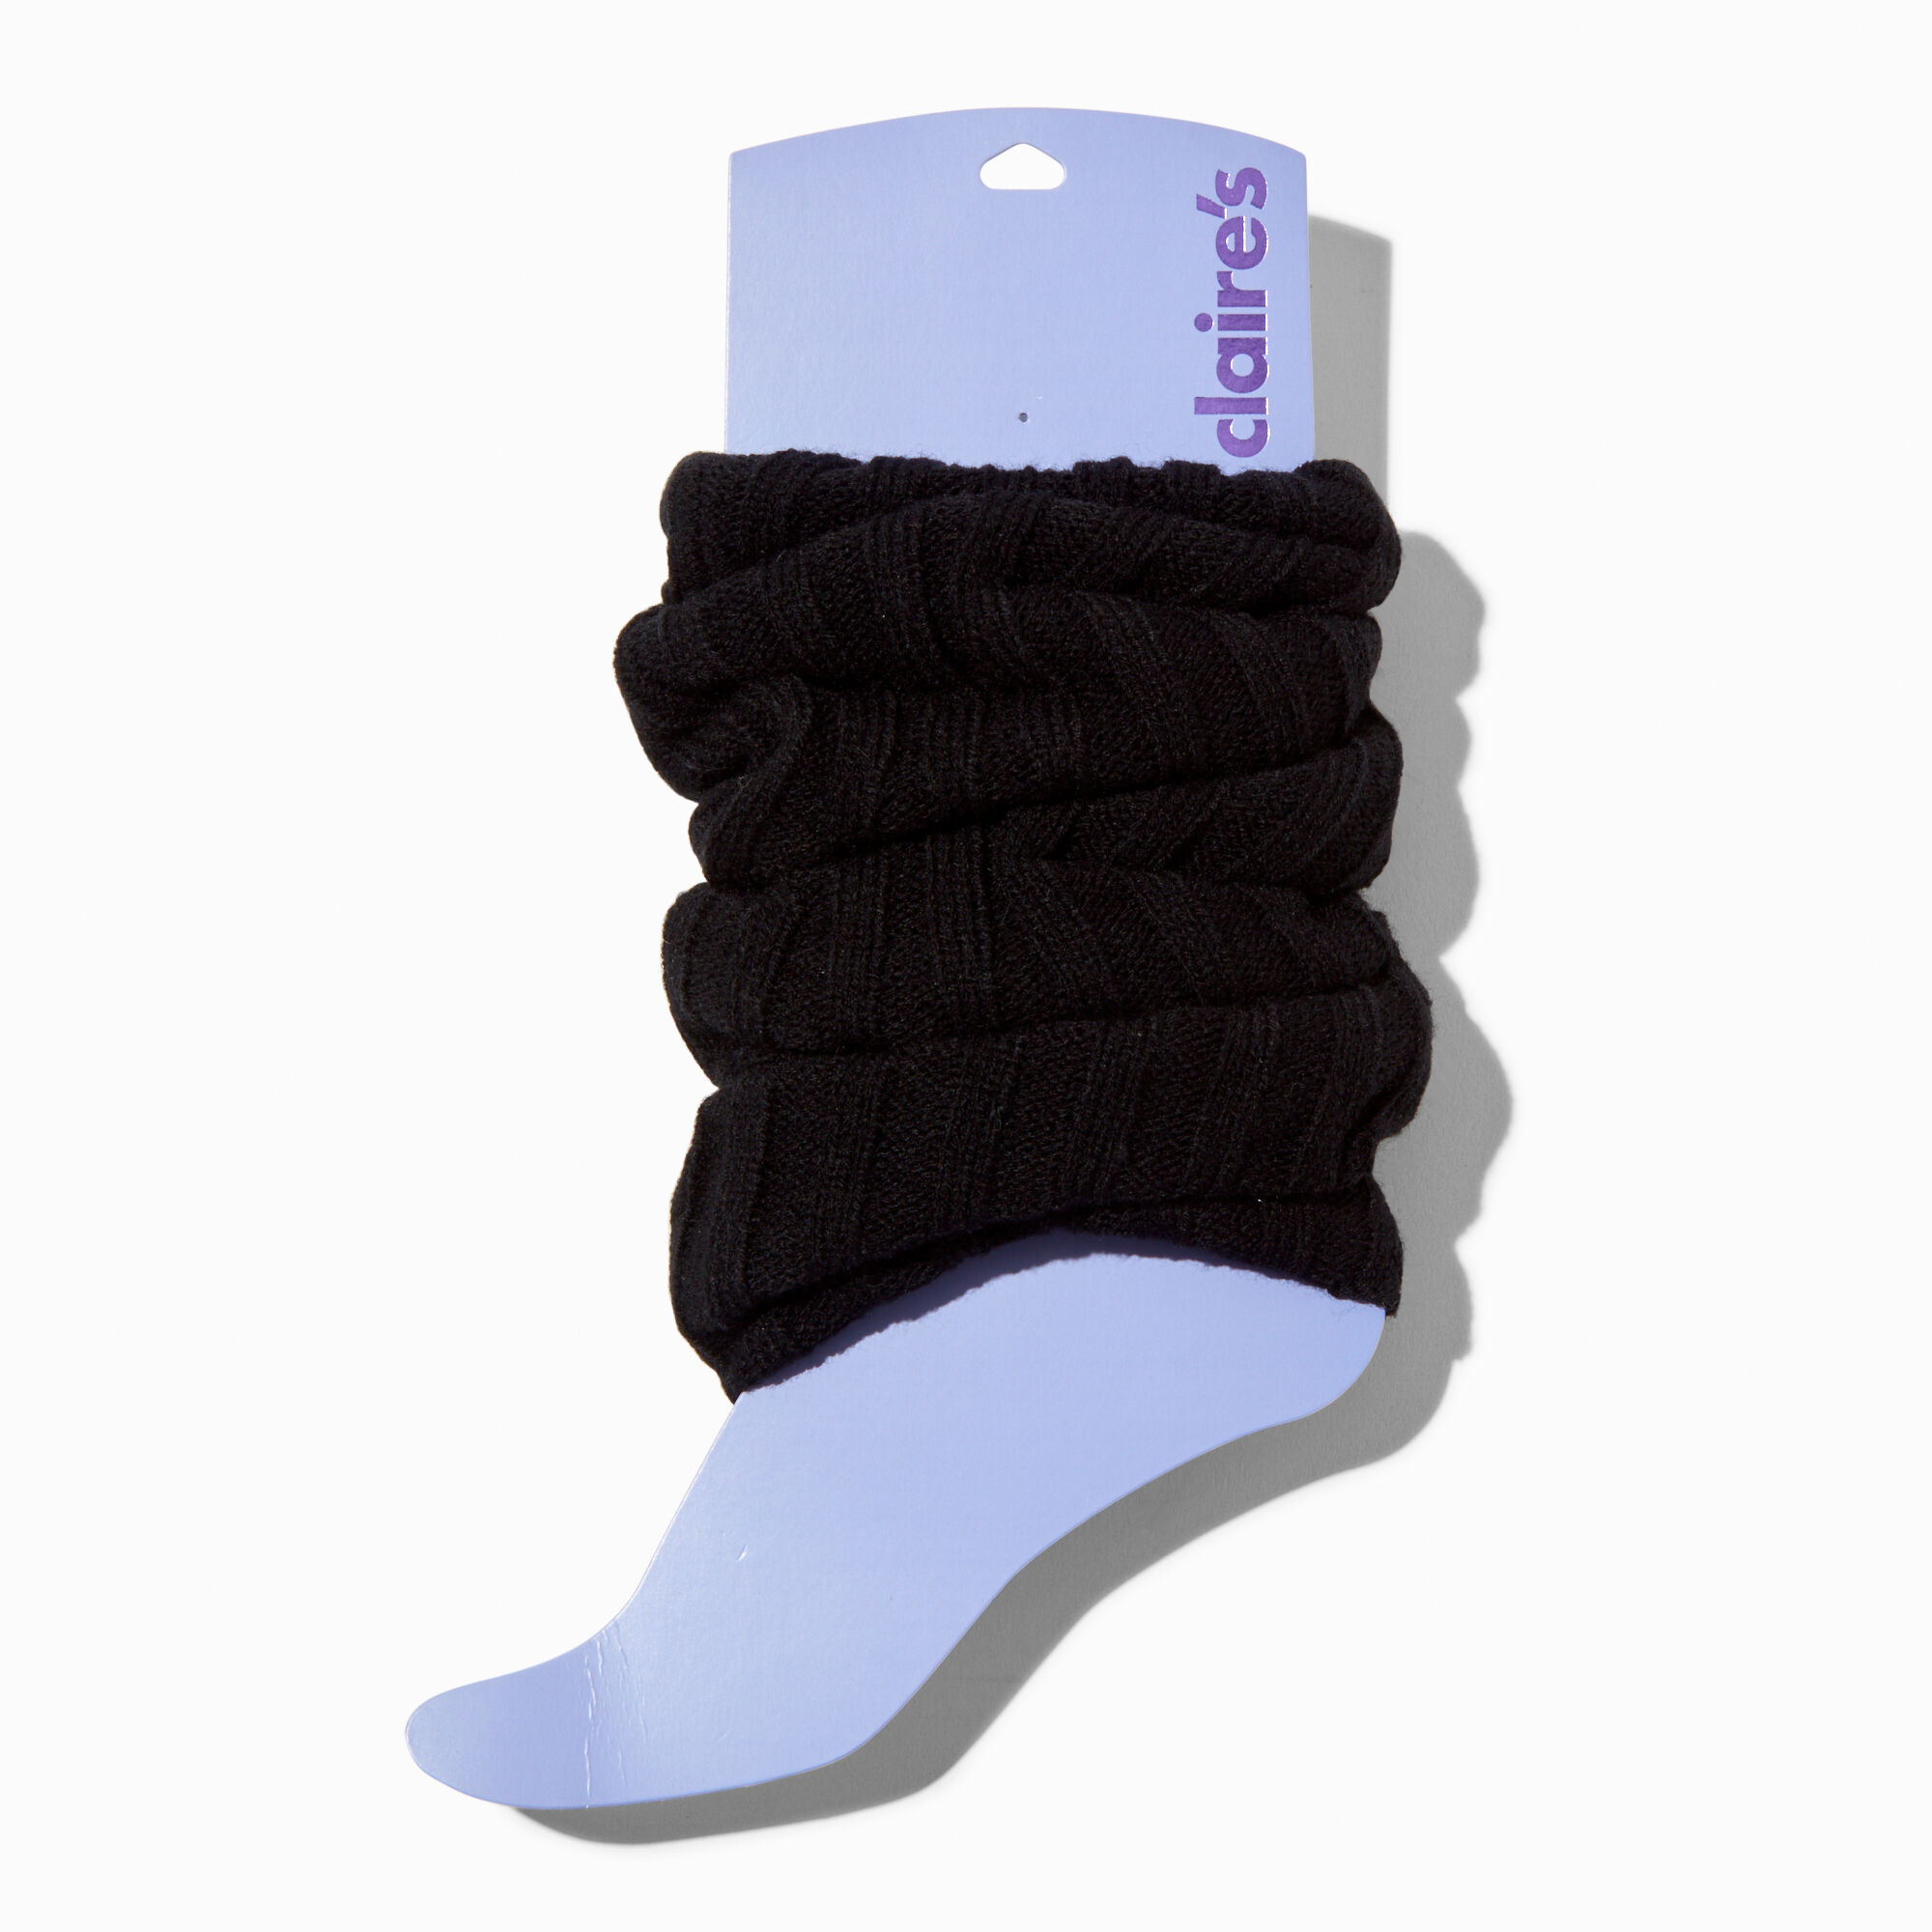 View Claires SweaterKnit Leg Warmers Black information